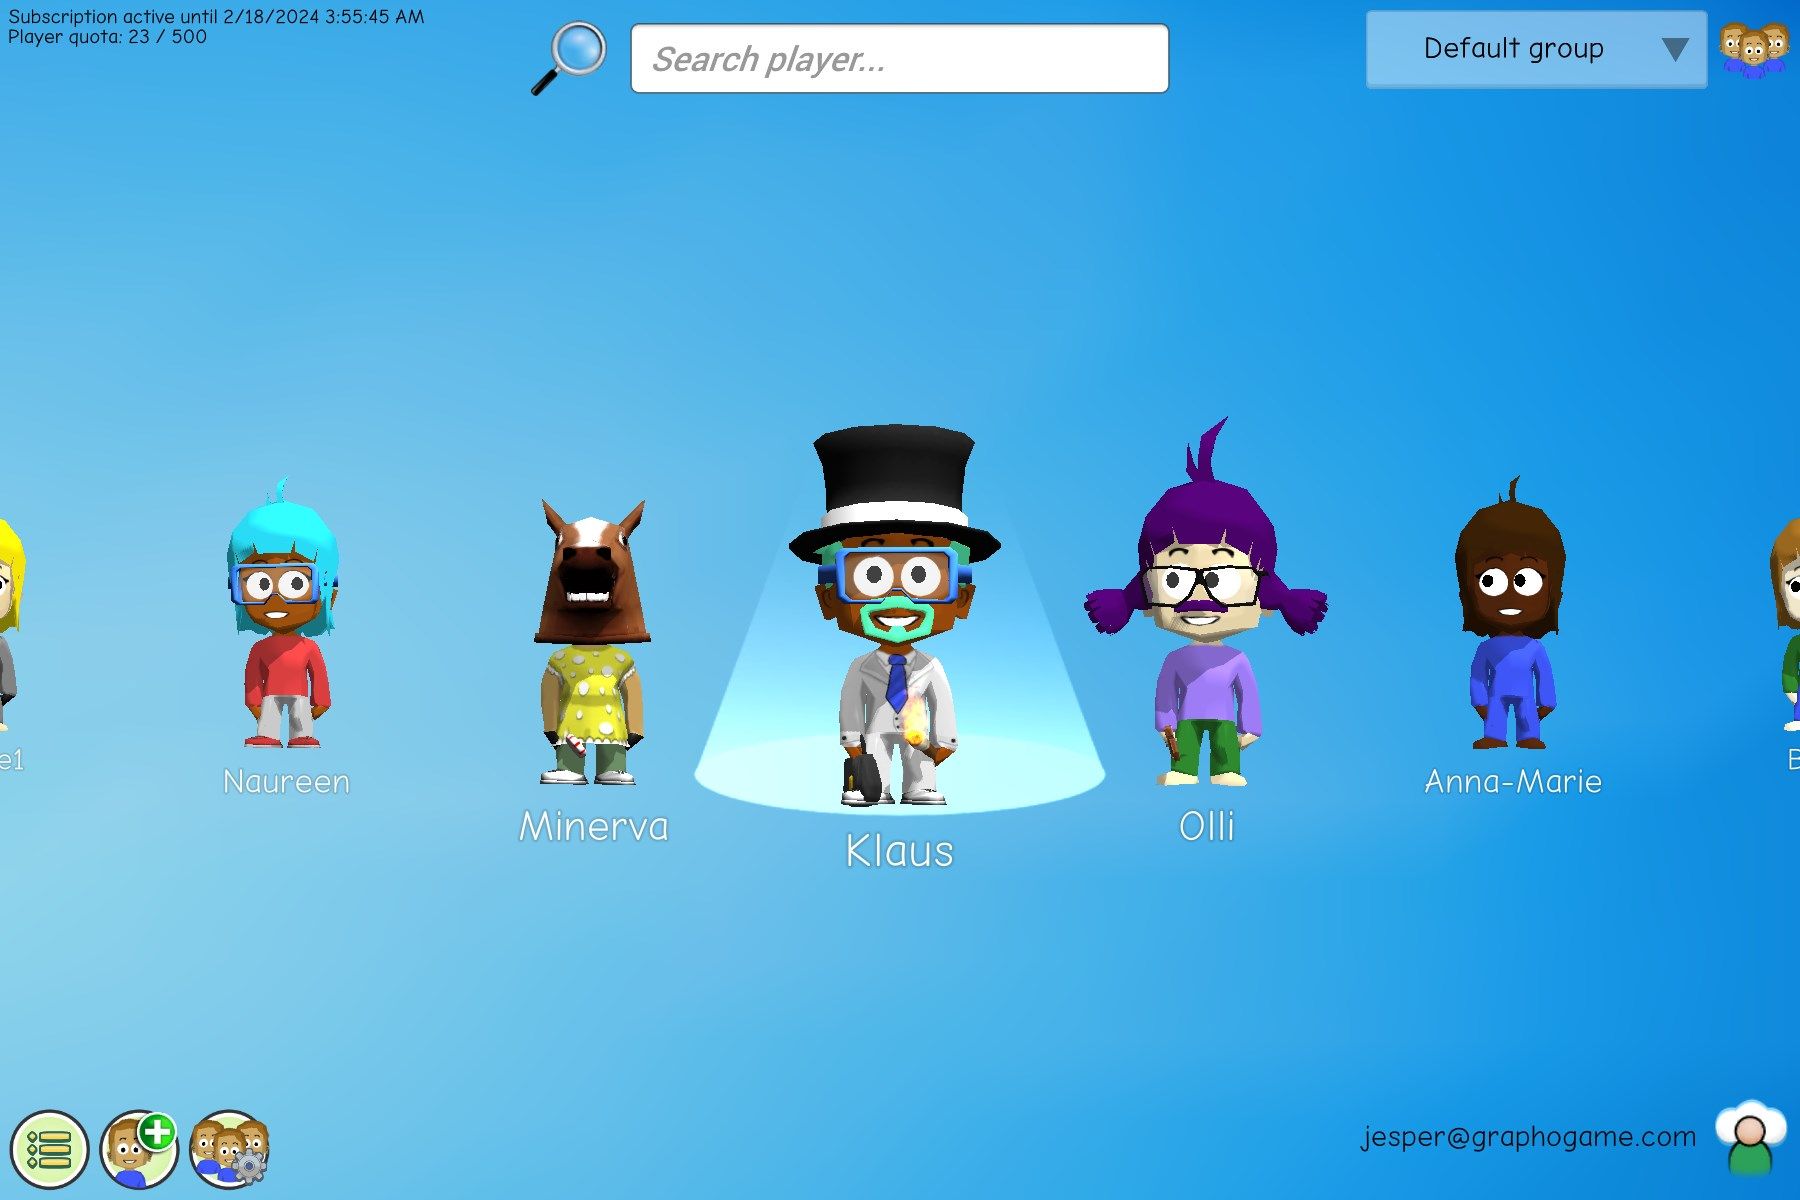 Personalise your own avatar